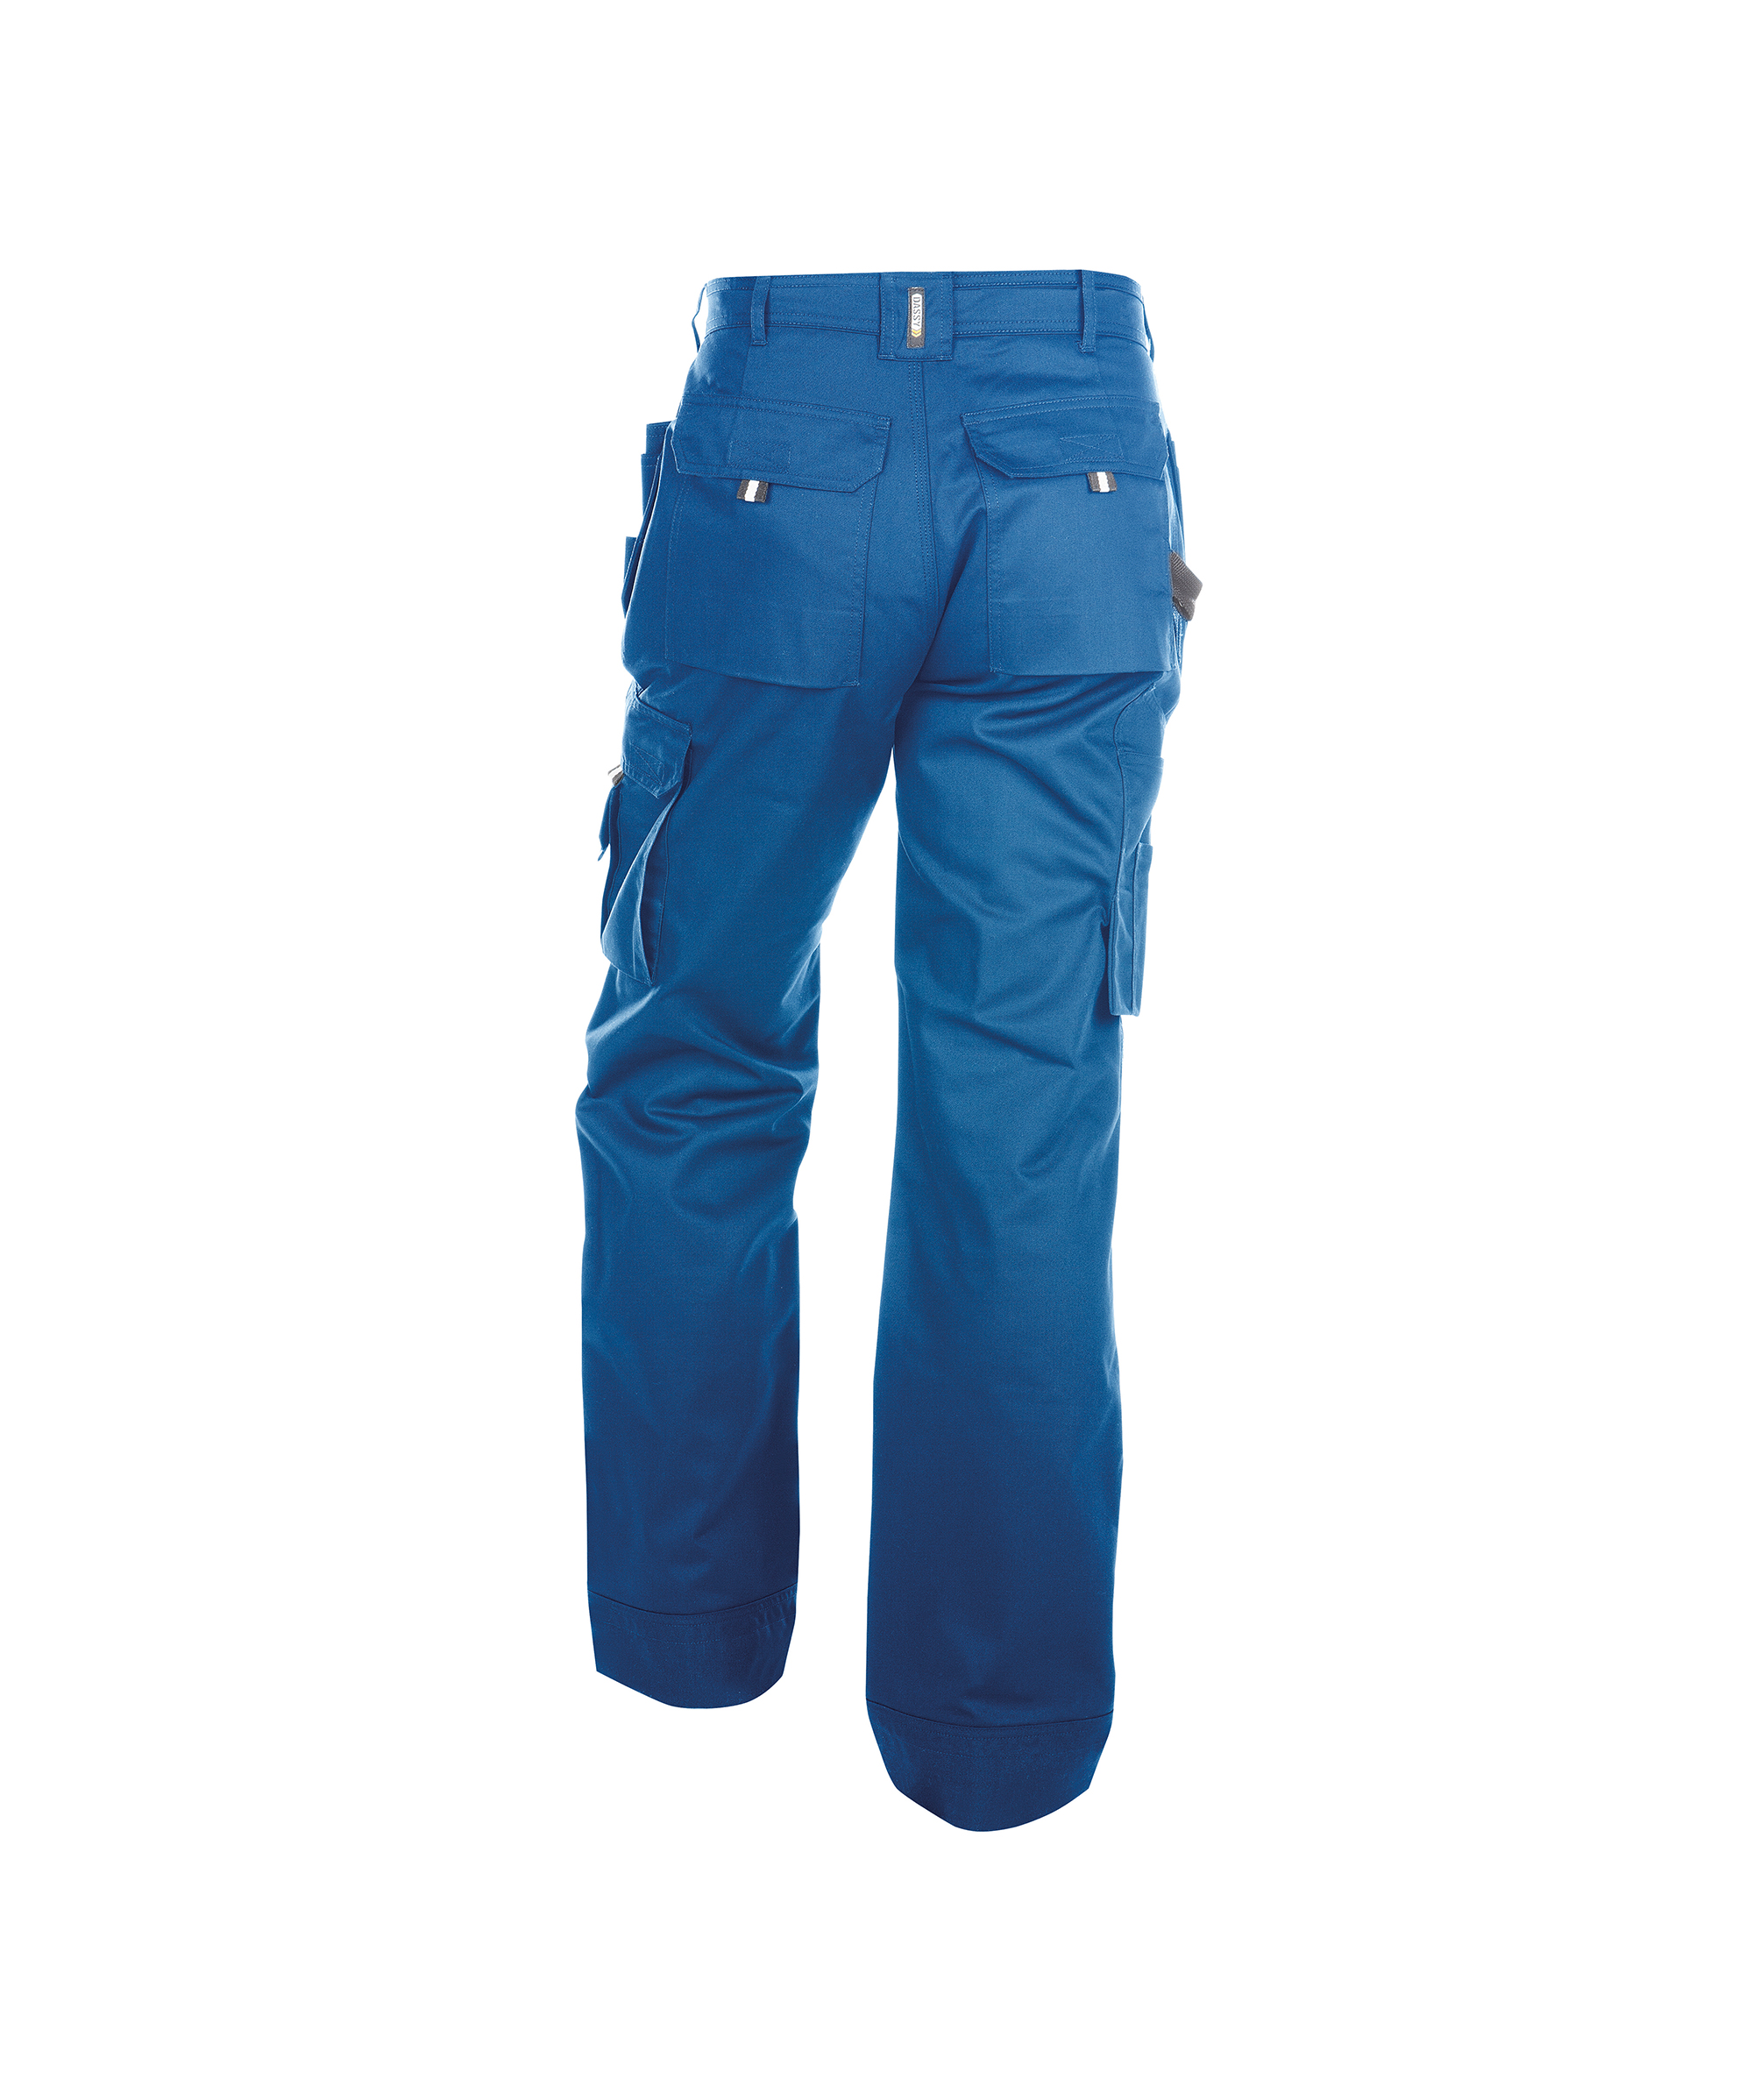 oxford_work-trousers-with-multi-pockets-and-knee-pockets_royal-blue_back.jpg